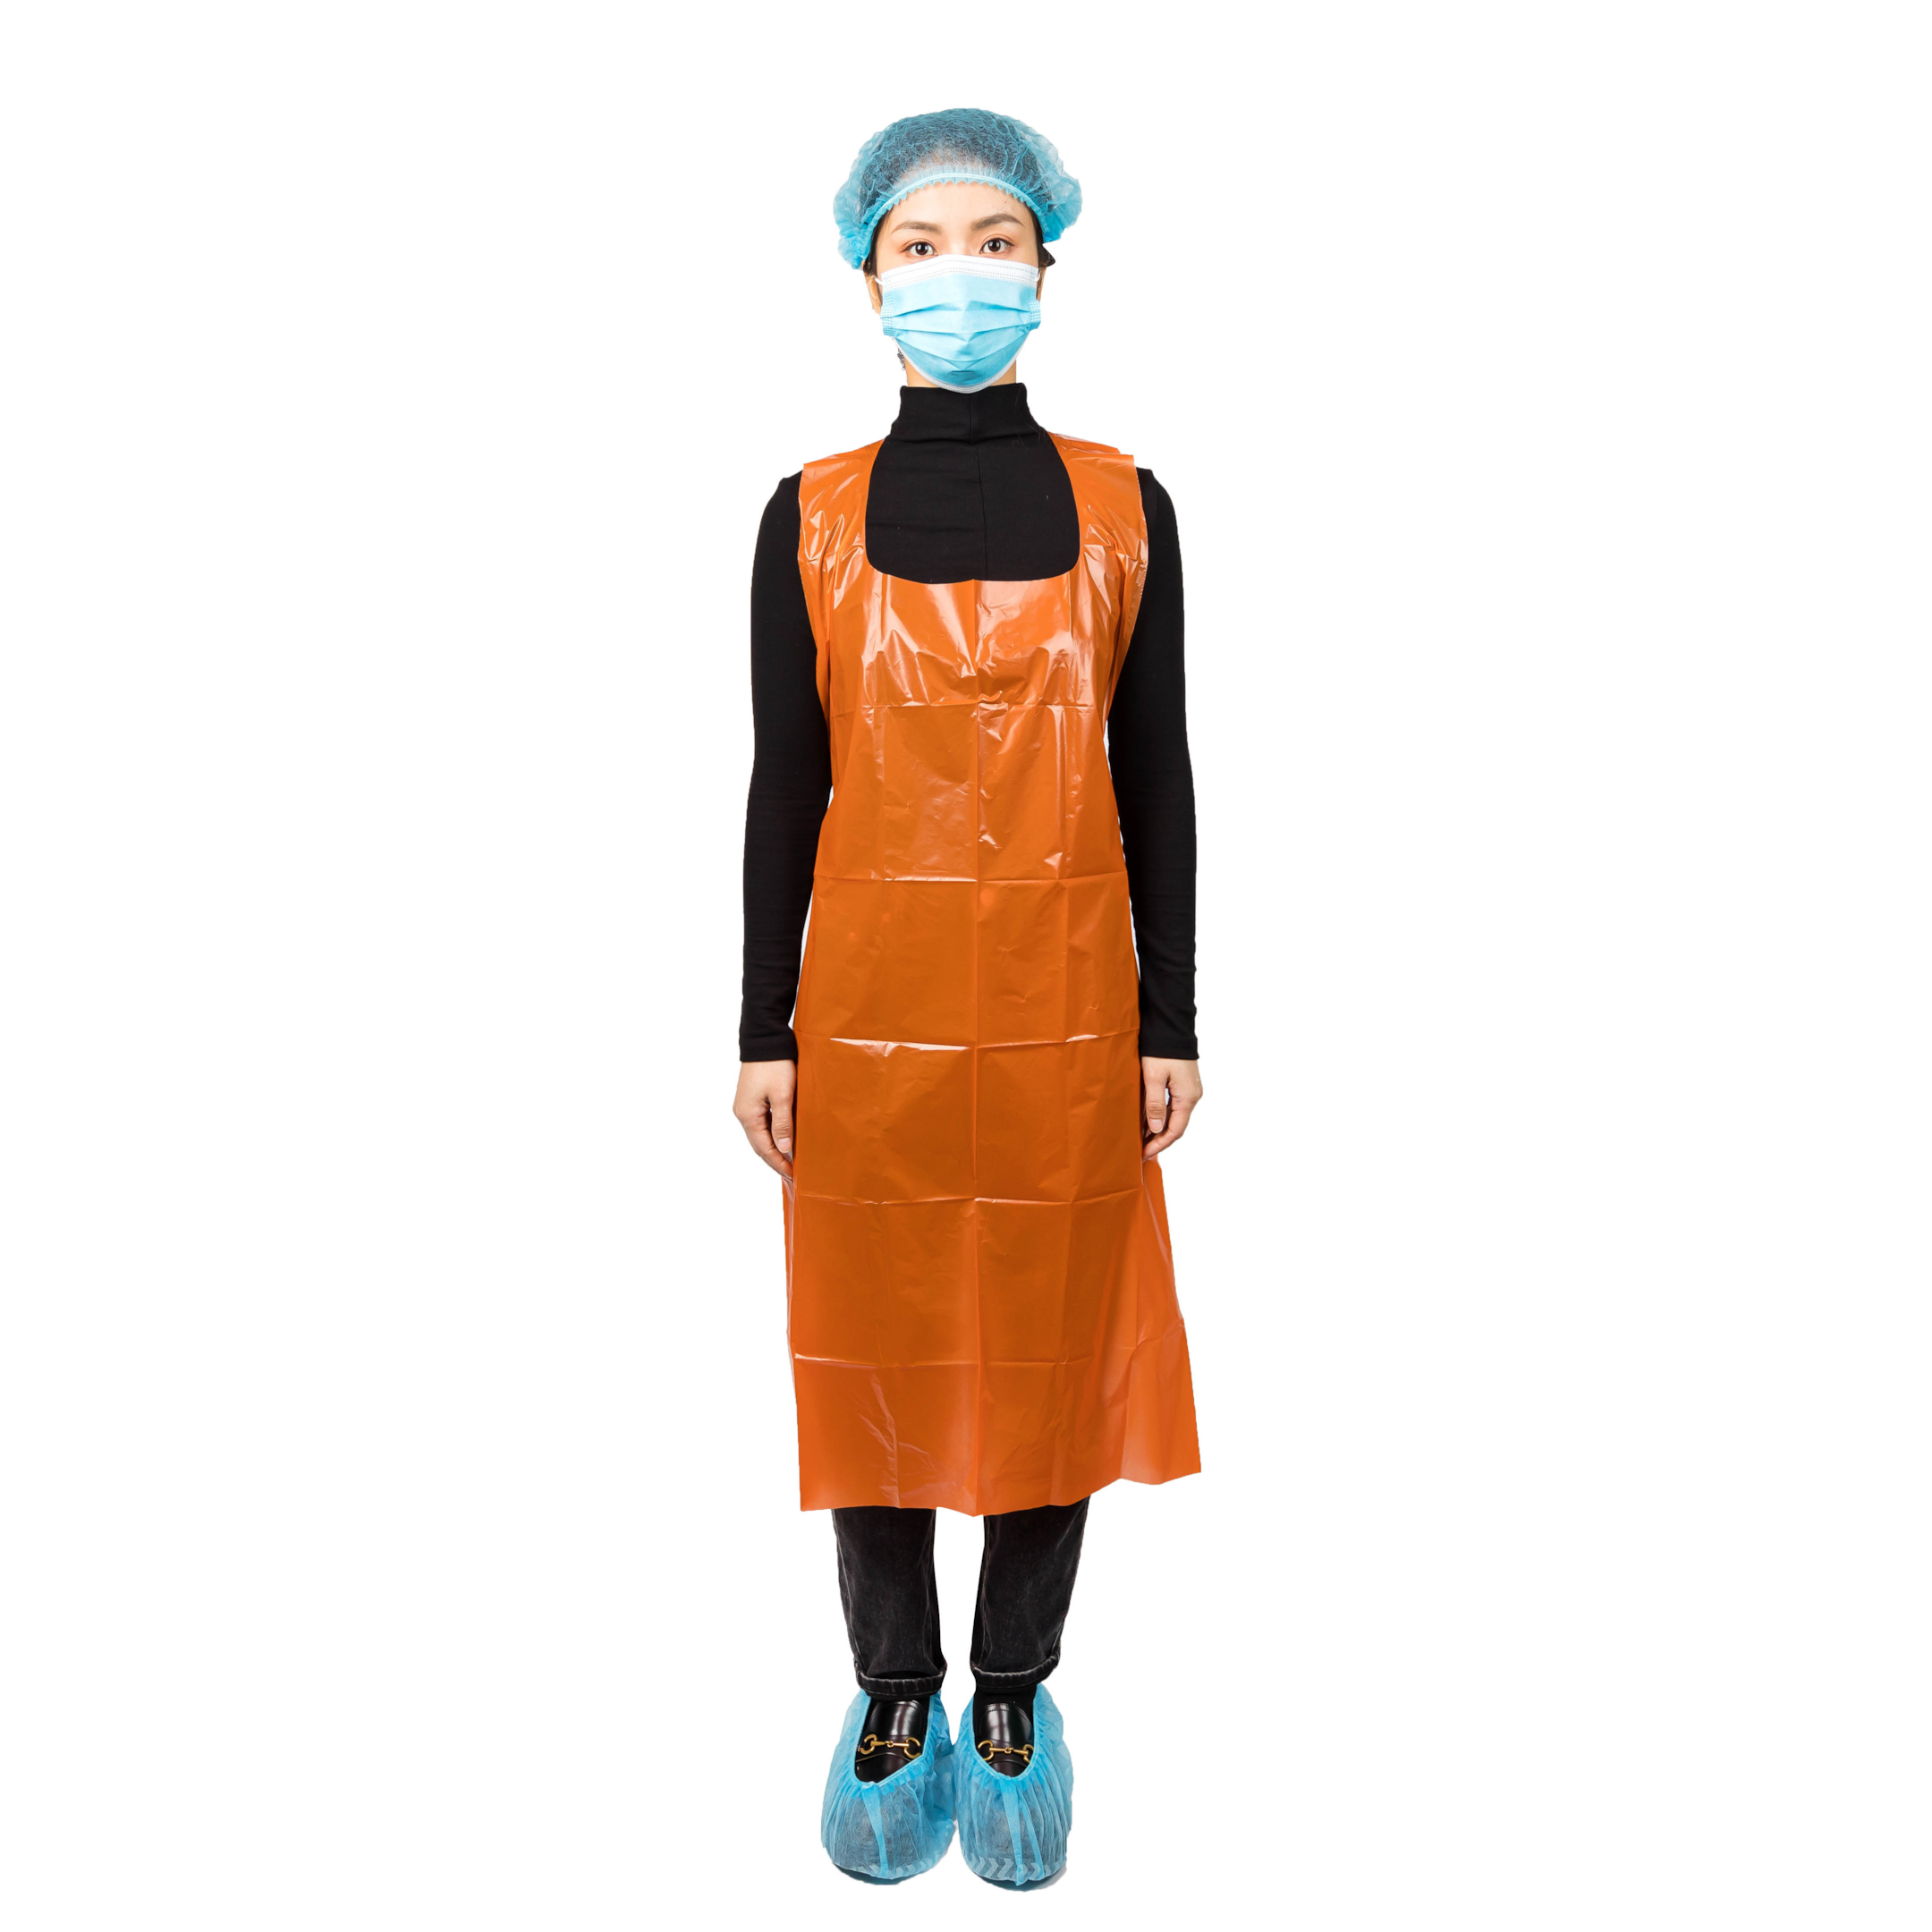 What are disposable apron used for - YouFu Medical -China disposable ...